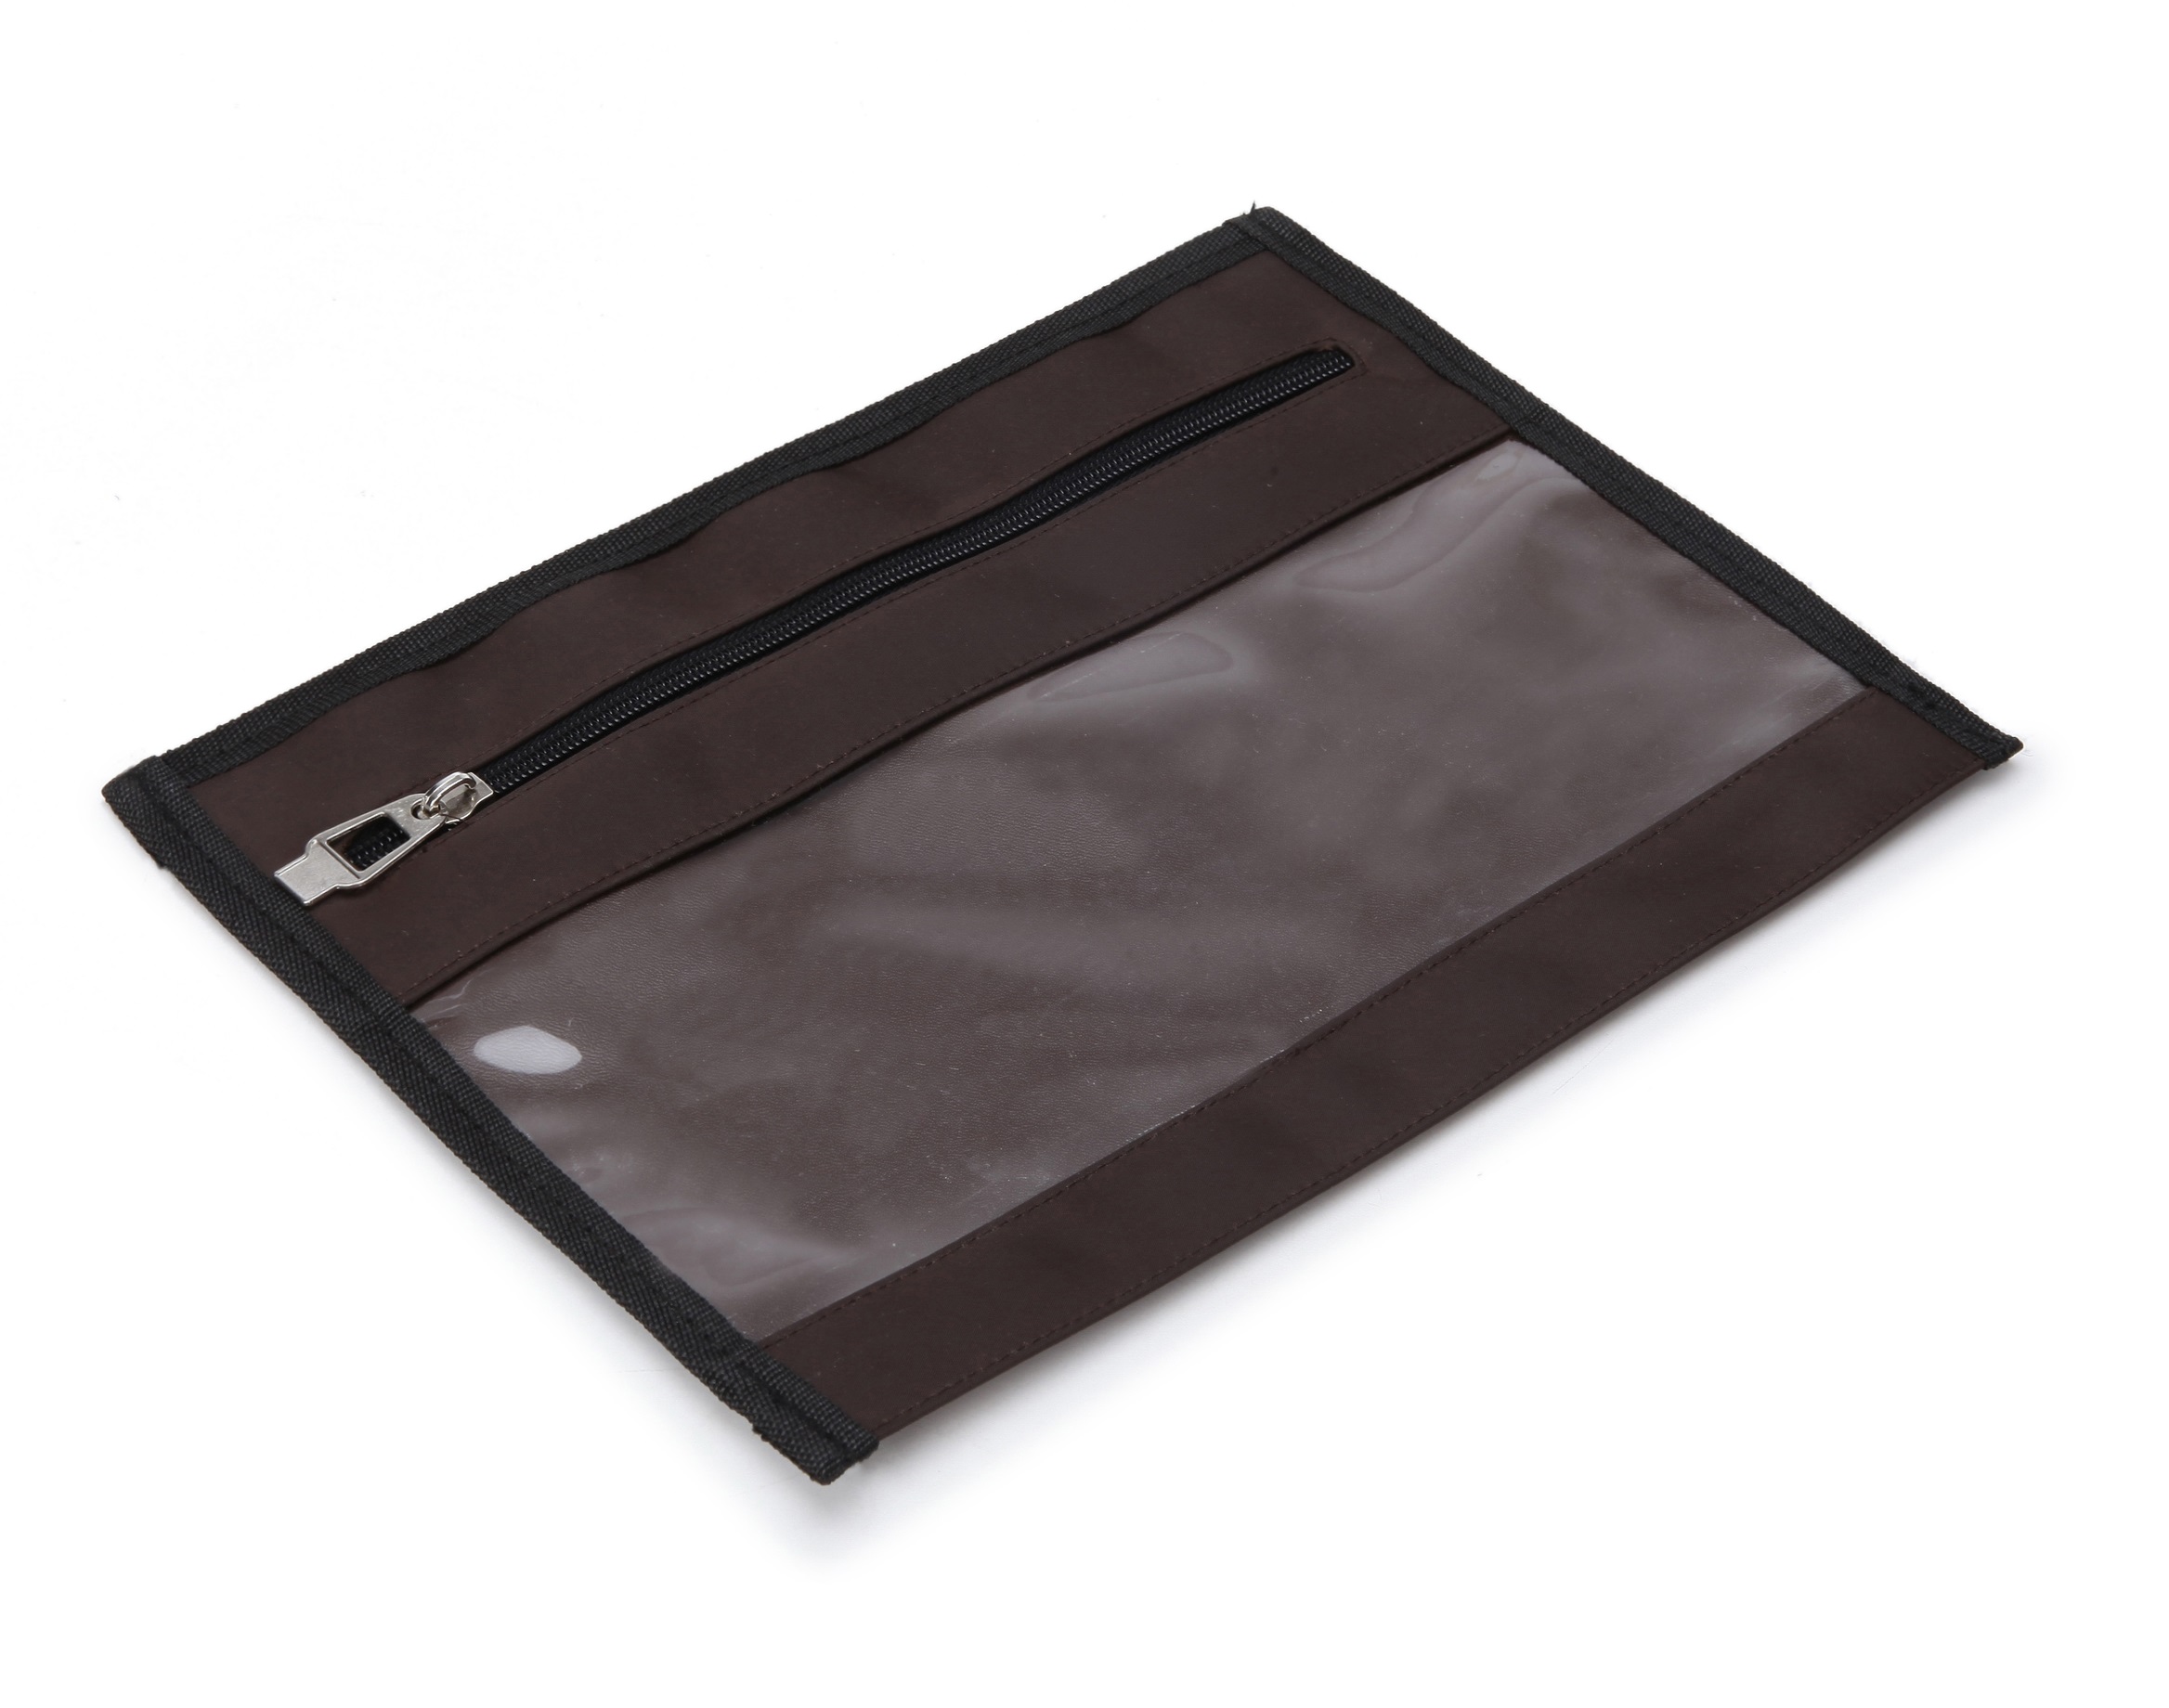 Re-Usable Locking Document Security Bag